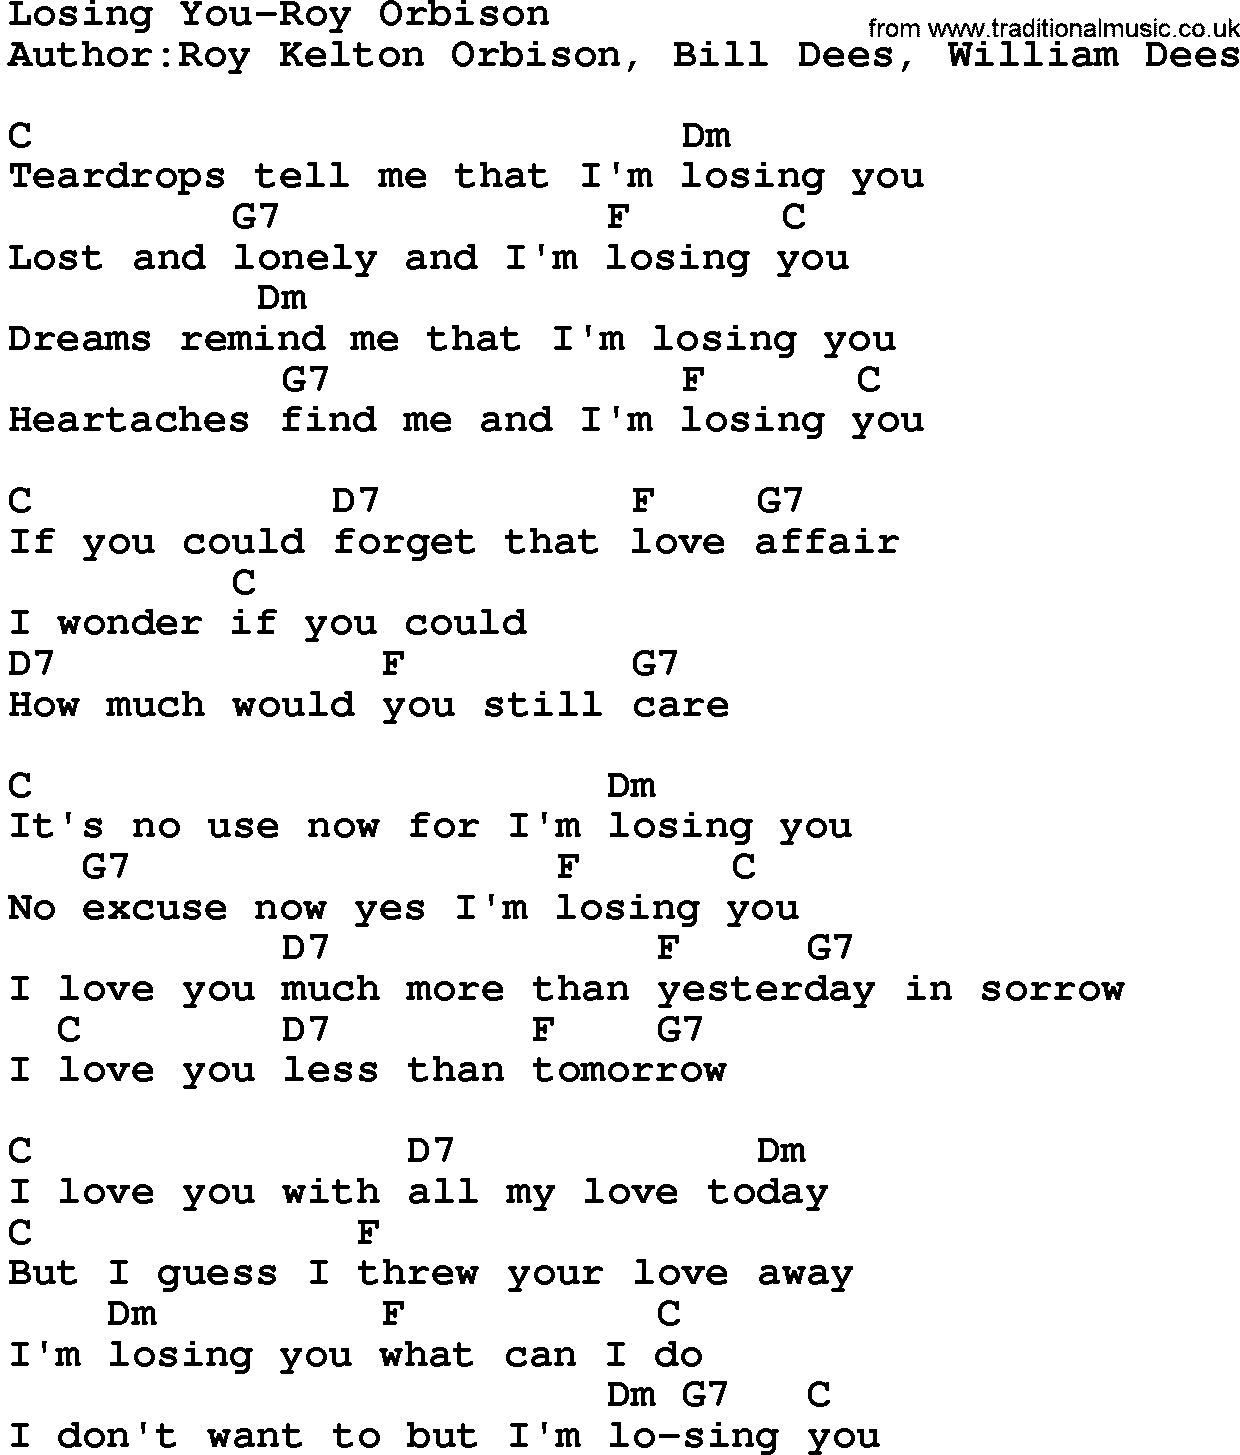 Country music song: Losing You-Roy Orbison lyrics and chords